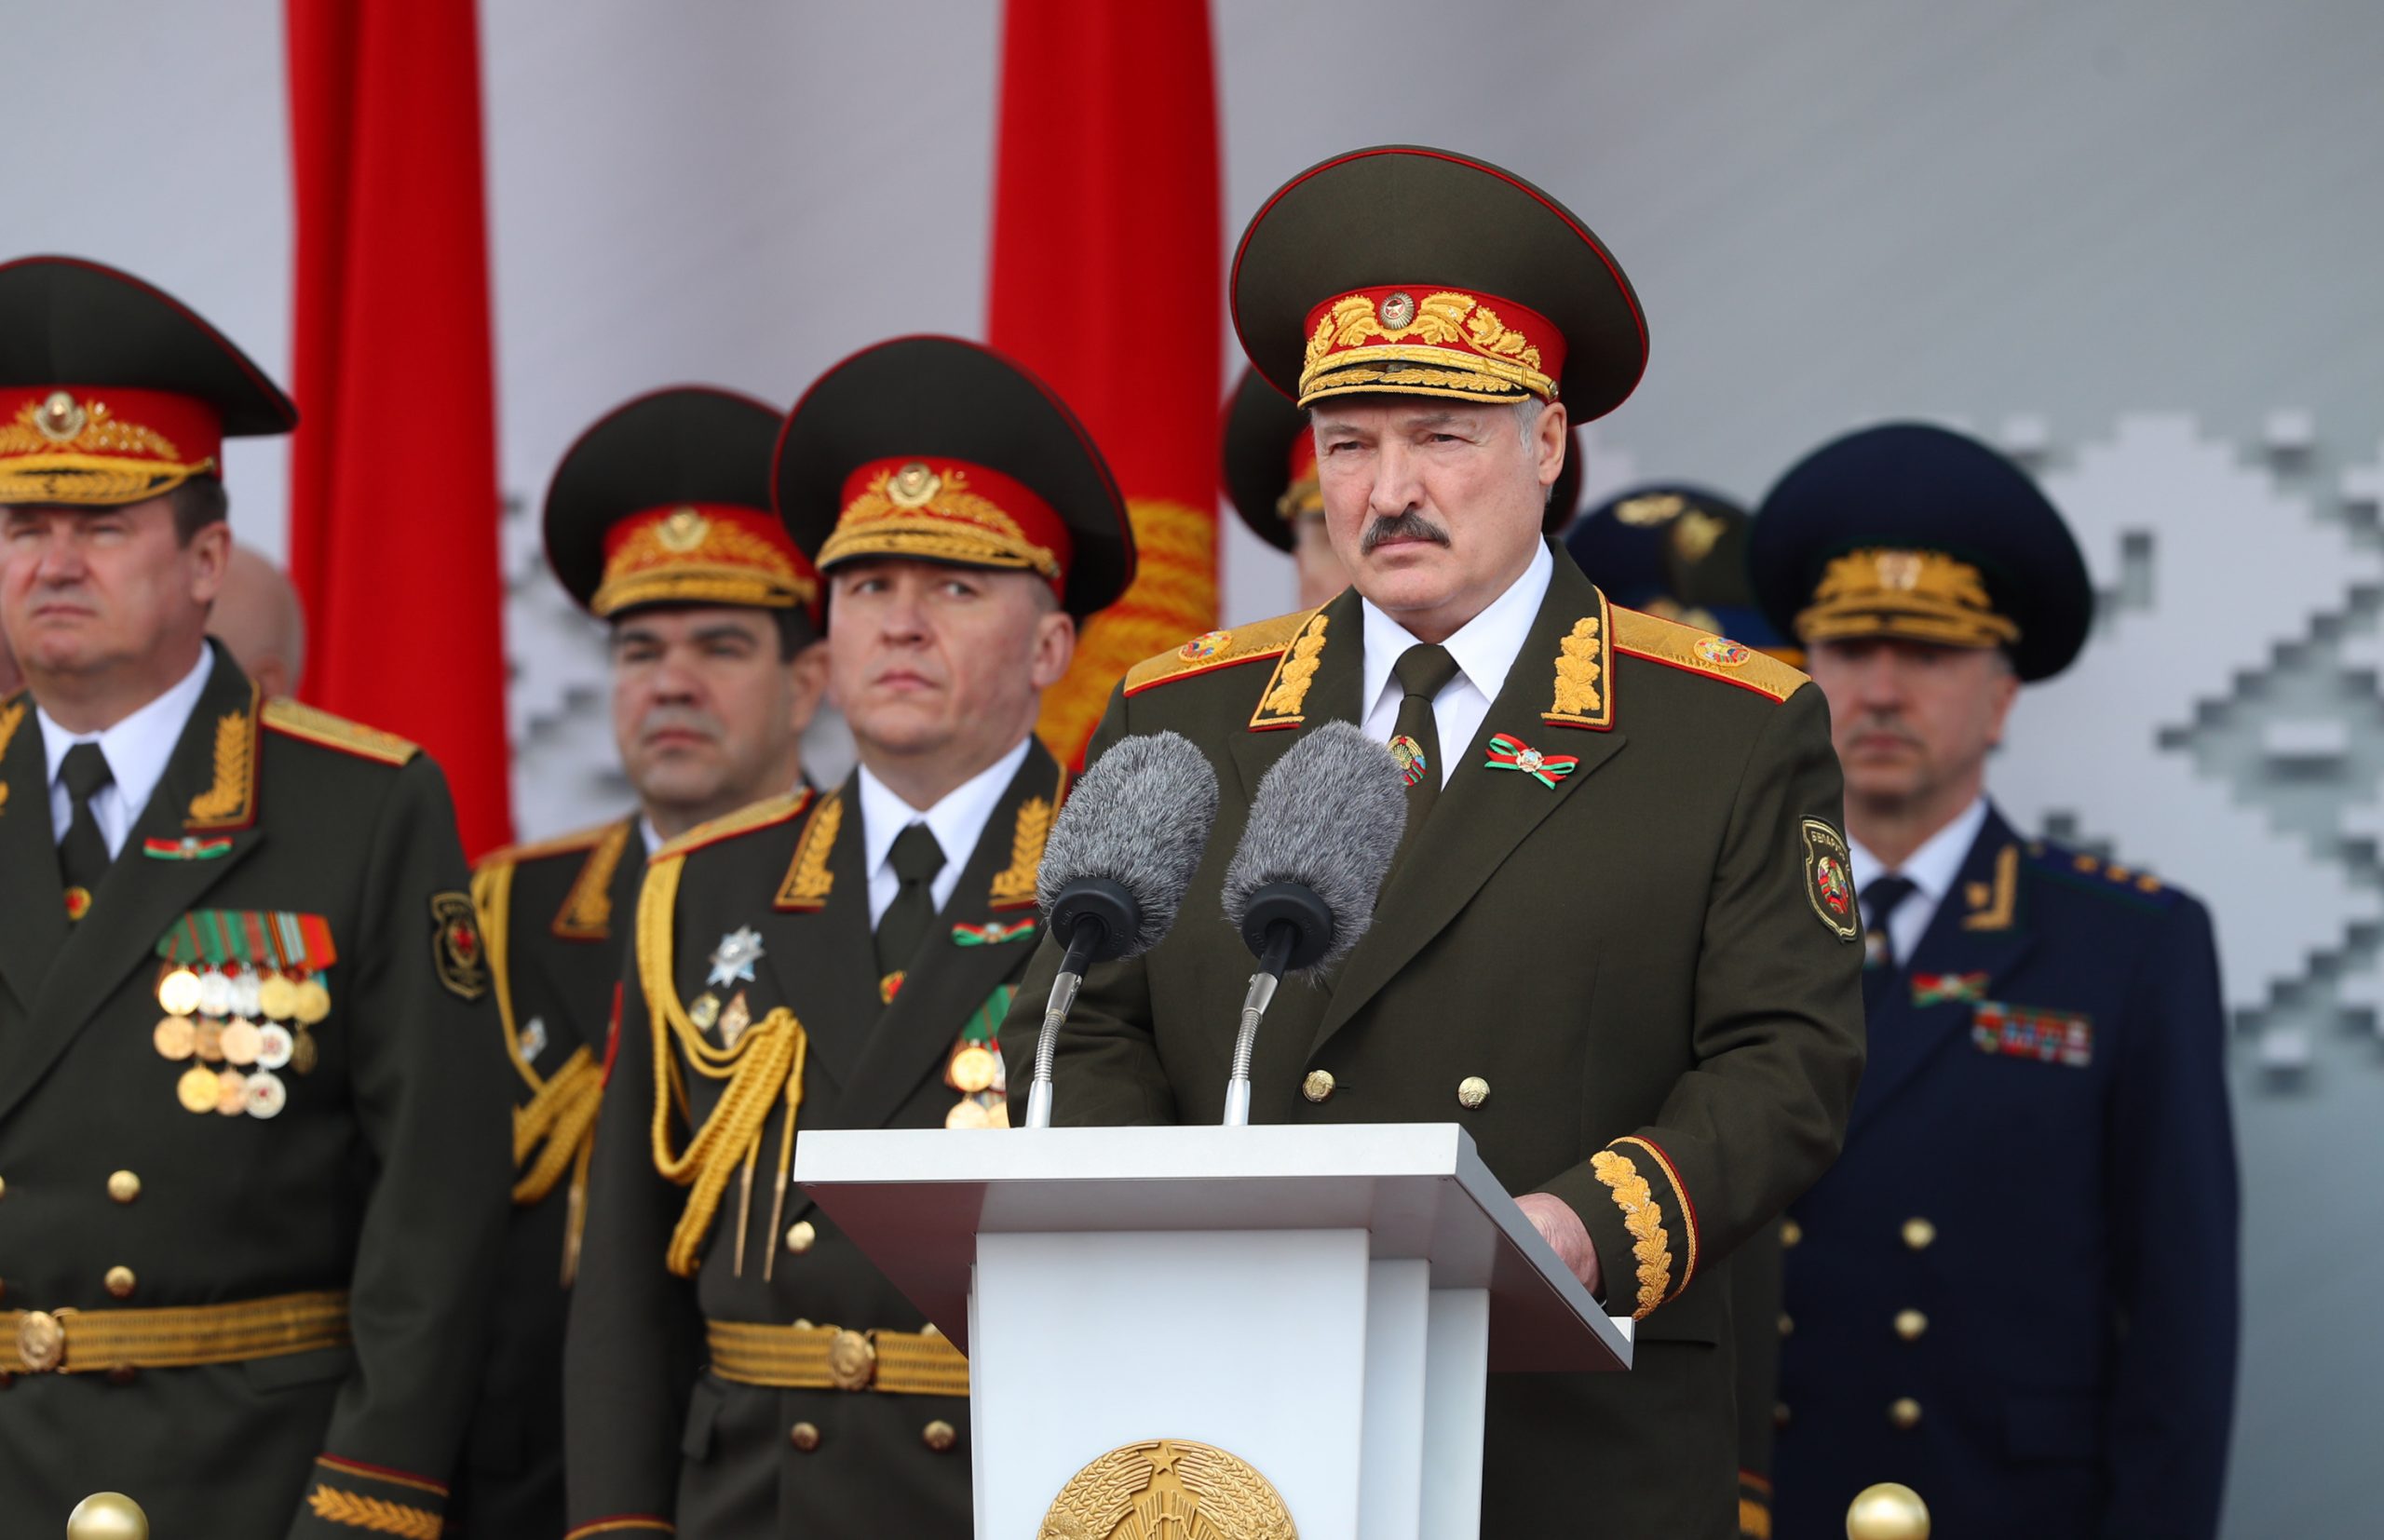 Belarus military has received assistance from the UK a dozen times in past five years